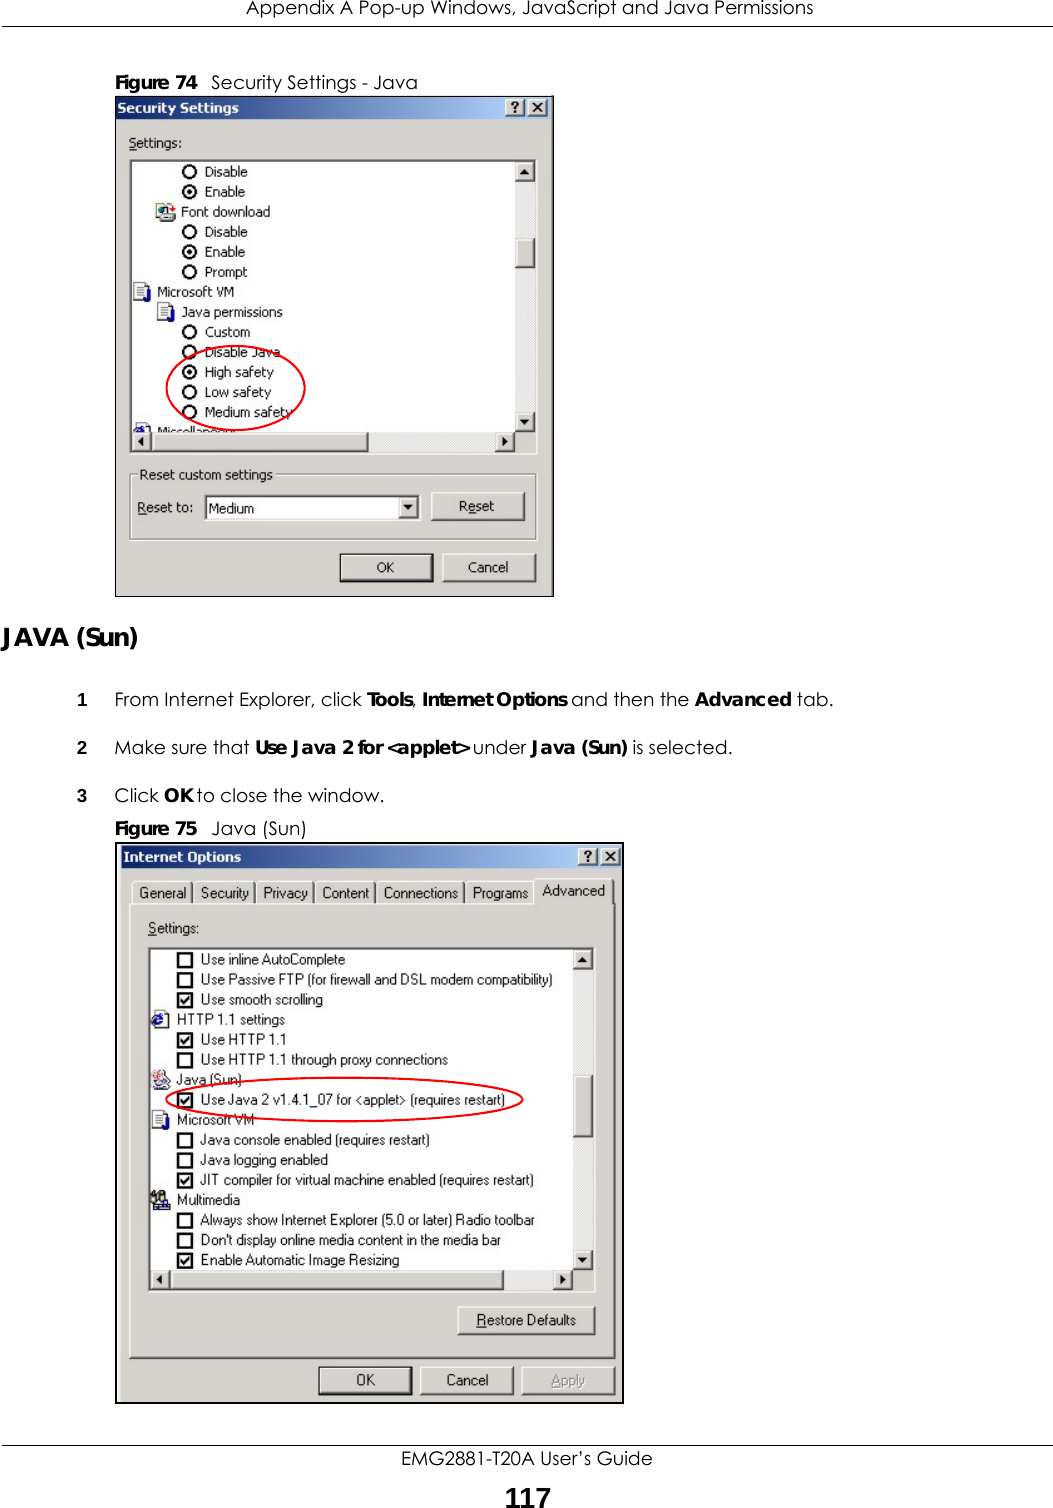  Appendix A Pop-up Windows, JavaScript and Java PermissionsEMG2881-T20A User’s Guide117Figure 74   Security Settings - Java JAVA (Sun)1From Internet Explorer, click Tools, Internet Options and then the Advanced tab. 2Make sure that Use Java 2 for &lt;applet&gt; under Java (Sun) is selected.3Click OK to close the window.Figure 75   Java (Sun)